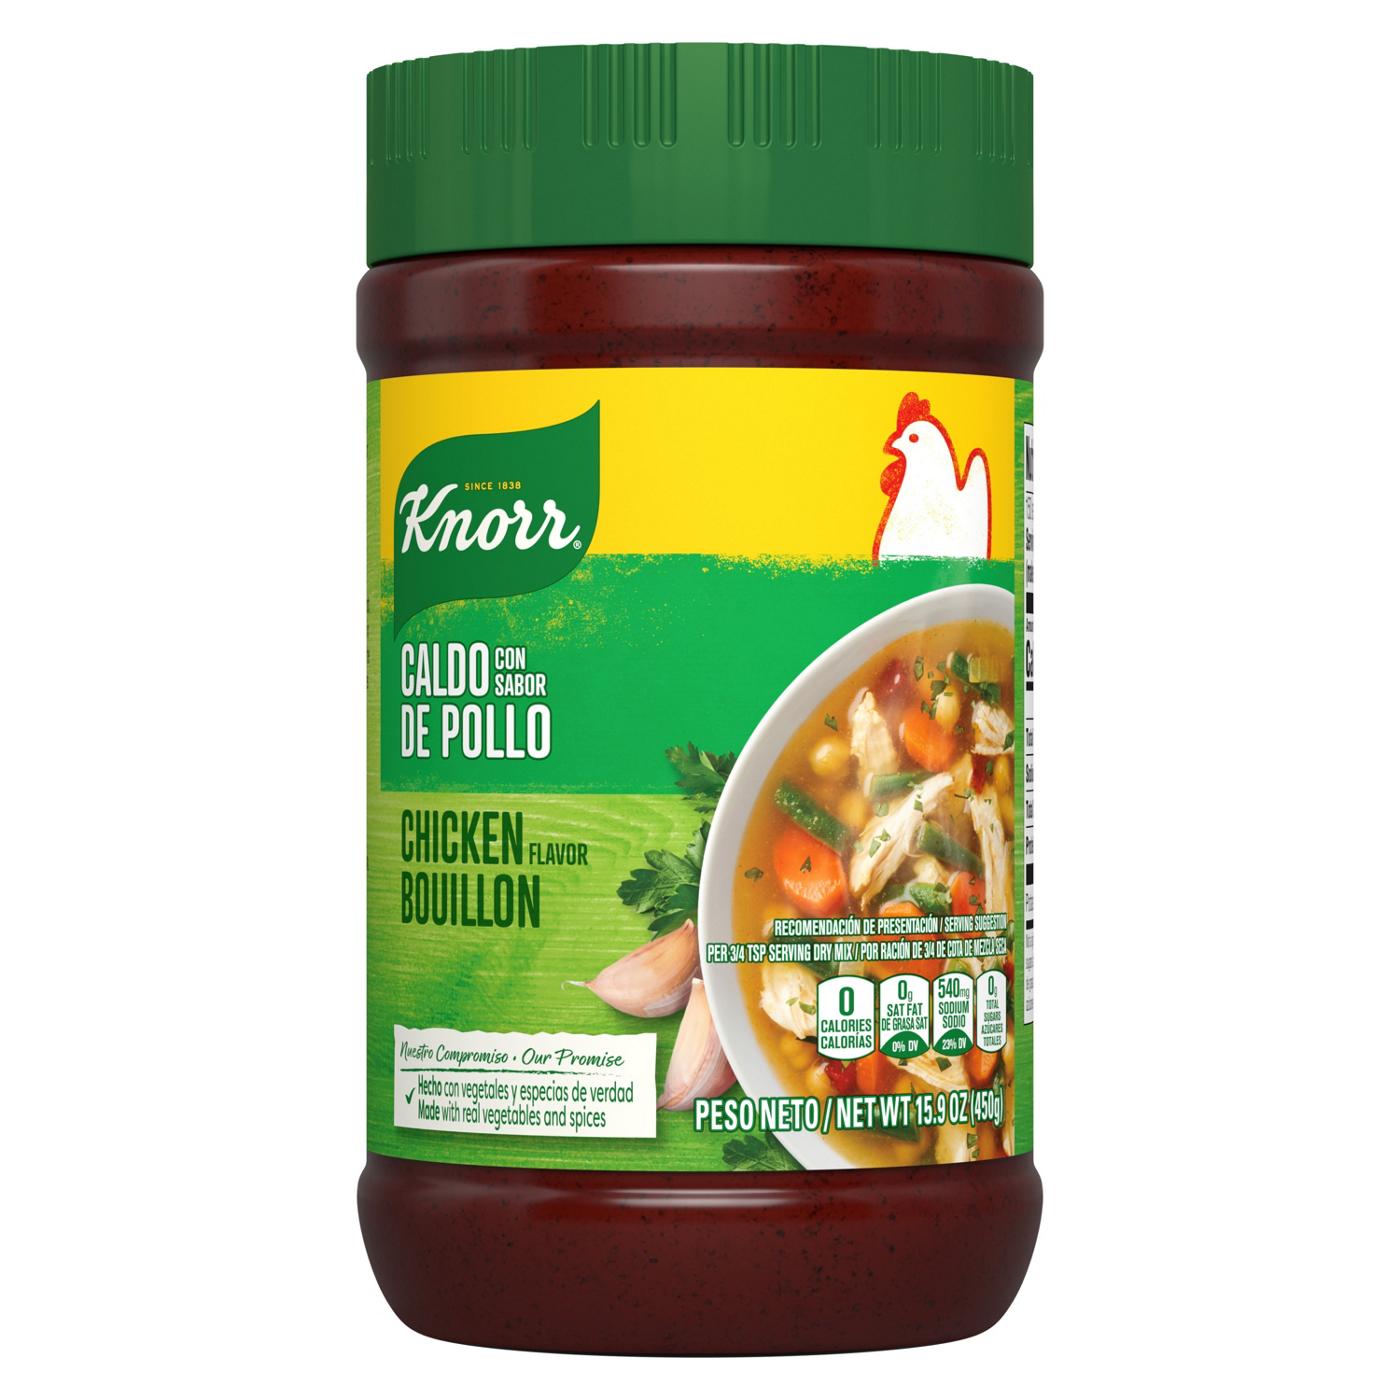 Knorr Chicken Granulated Bouillon; image 1 of 13